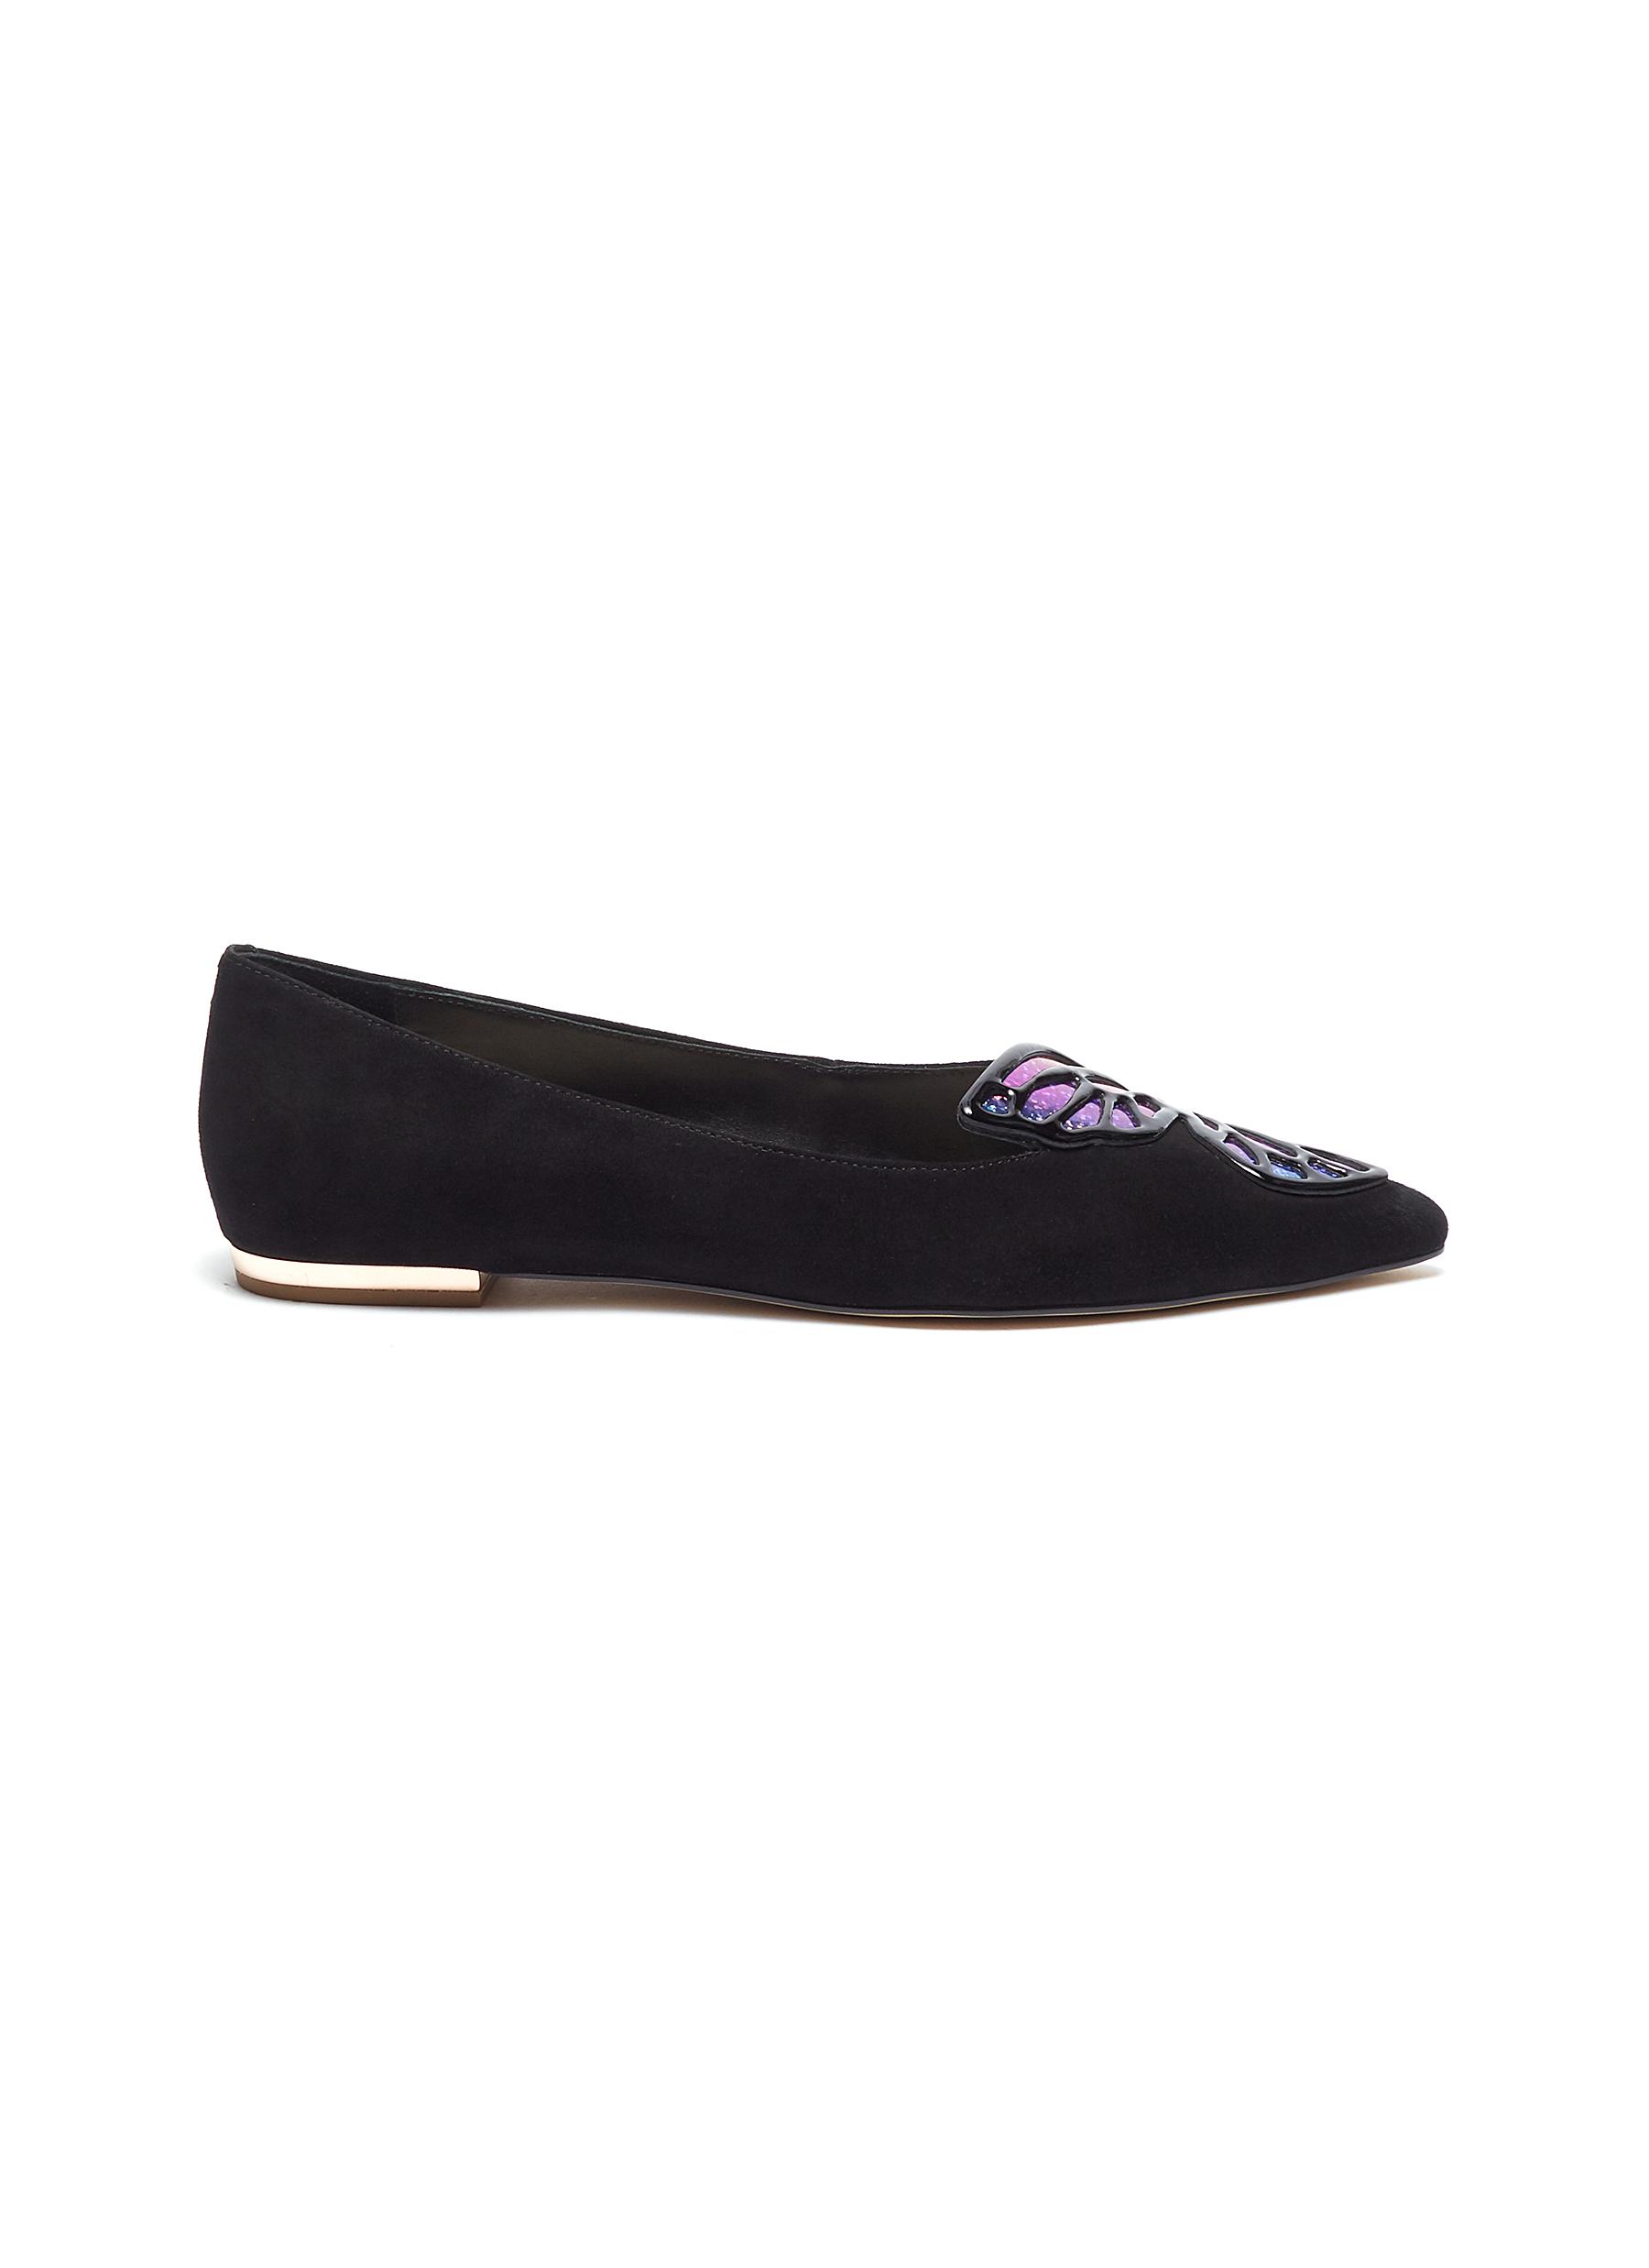 Bibi Butterfly wing embroidered suede flats by Sophia Webster